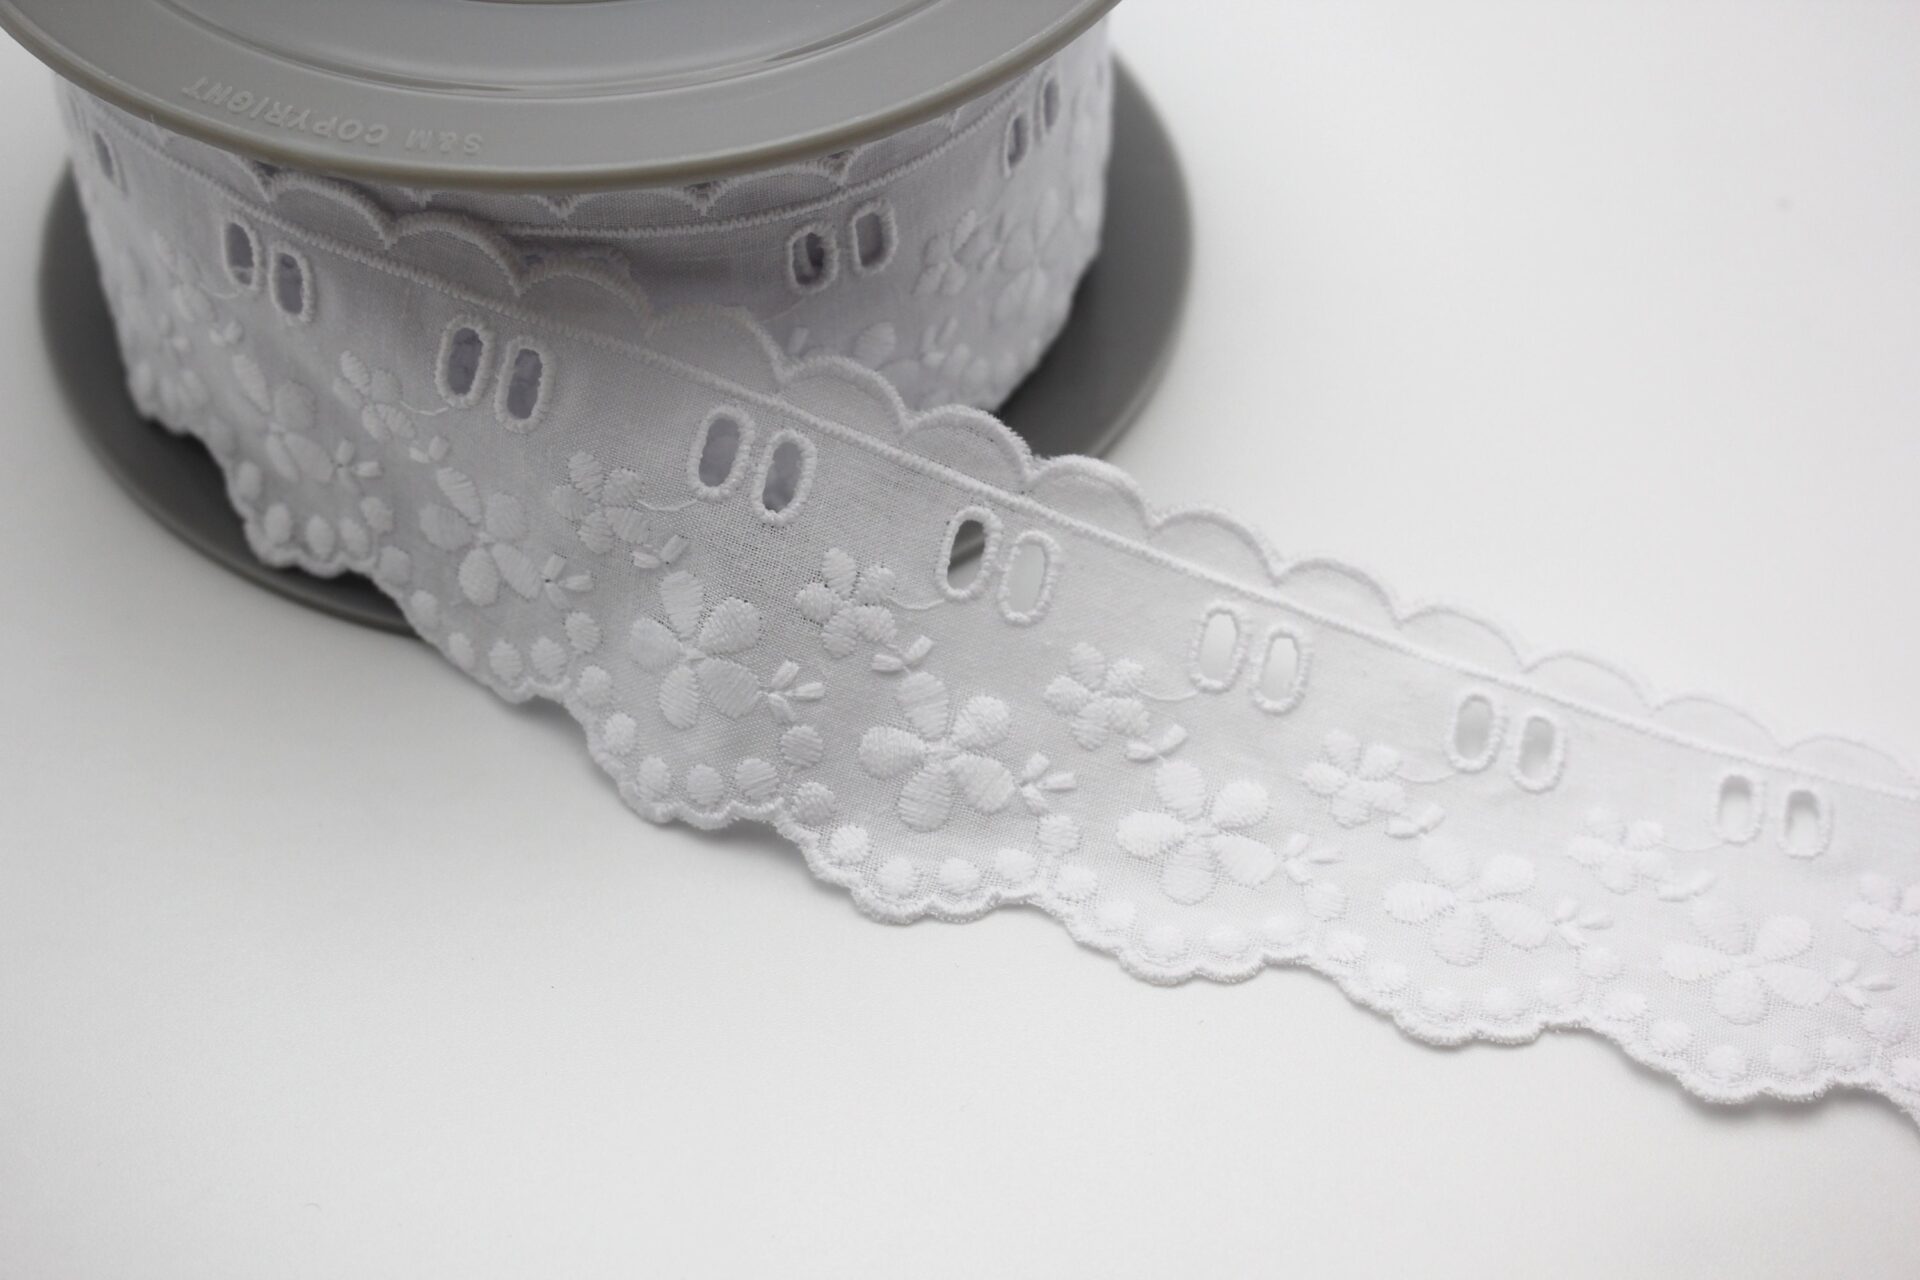 10 Yards of White Lace Trim/ 10 Yards of White Lace Ribbon Approx. 1.6 4.2  Cm 